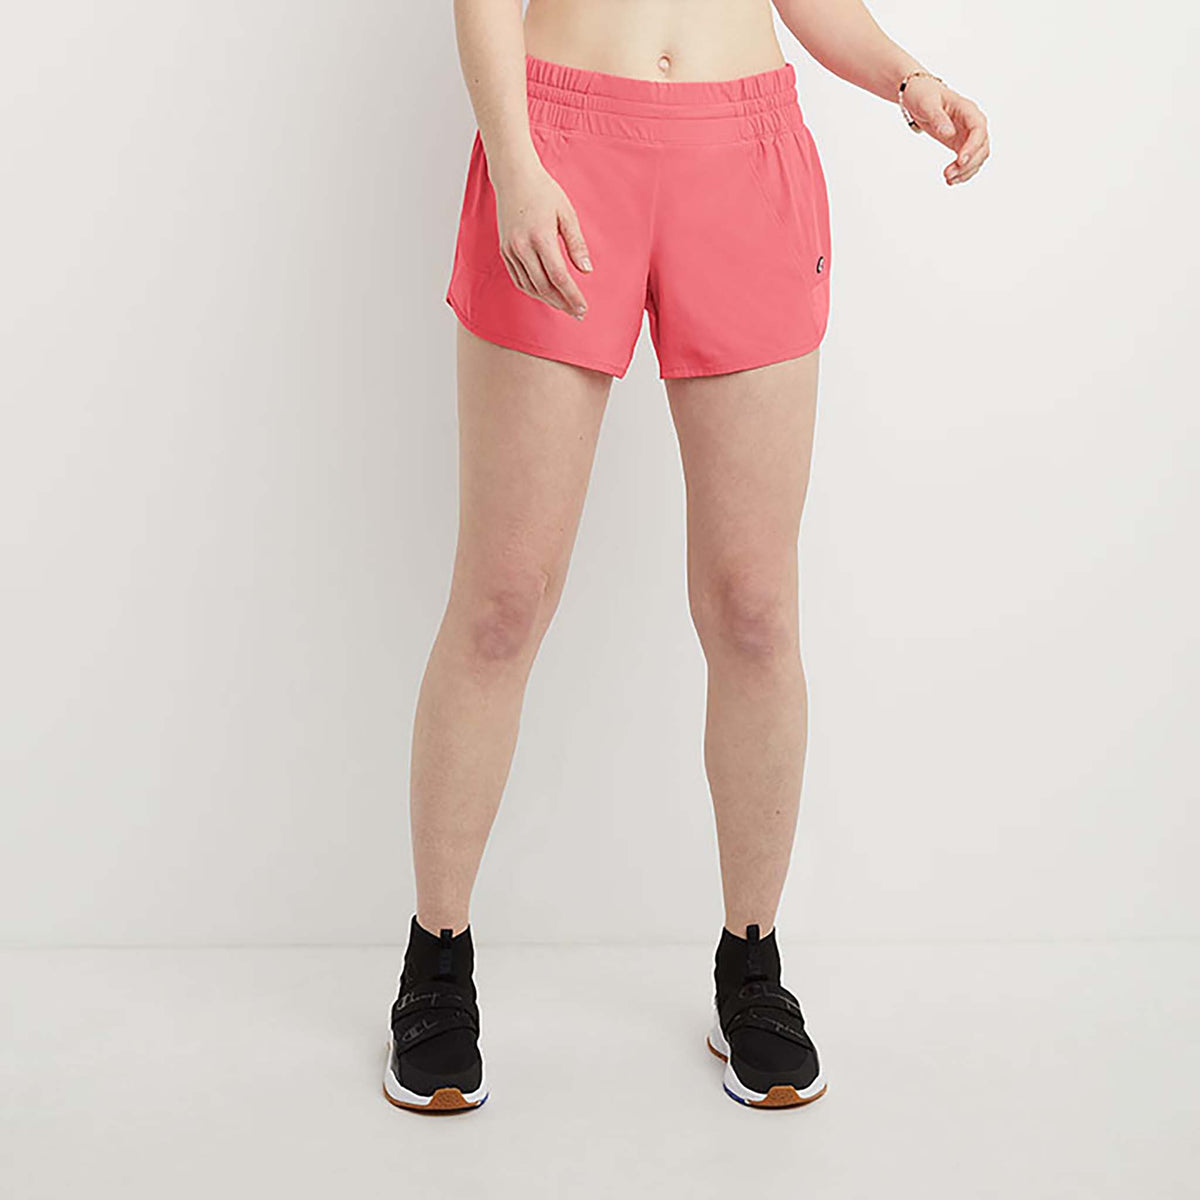 Champion Absolute shorts 4 pouces pinky peach femme